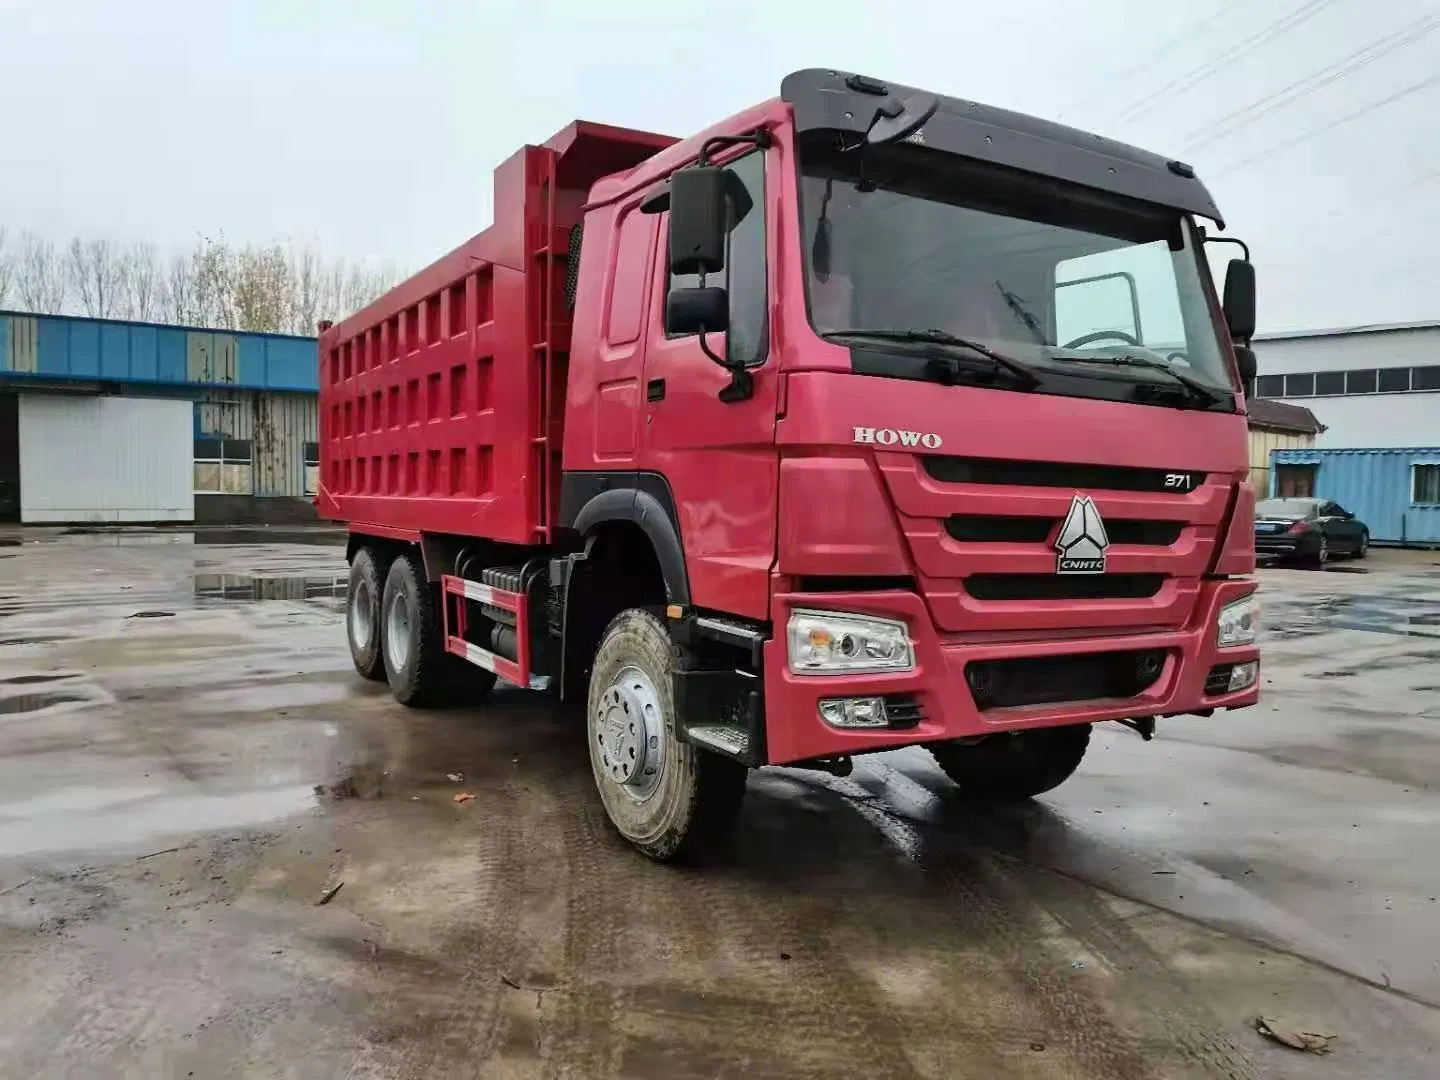 Used Dump Truck HOWO 371 Secondhand 6*4 Wheels Dump Truck High Quality with Nice Price